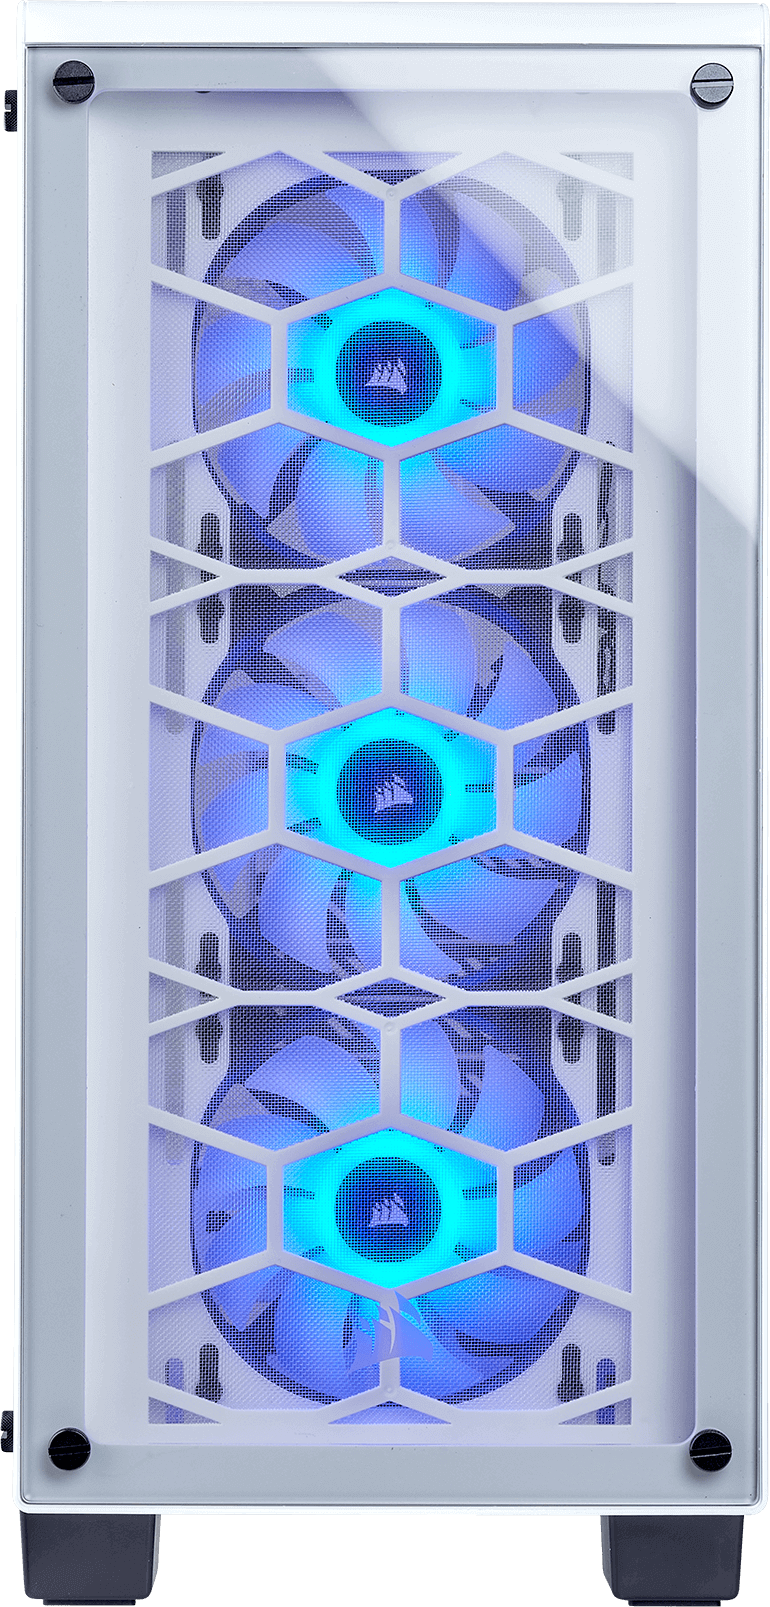 Crystal Series 460x Rgb Compact Atx Mid Tower Case White